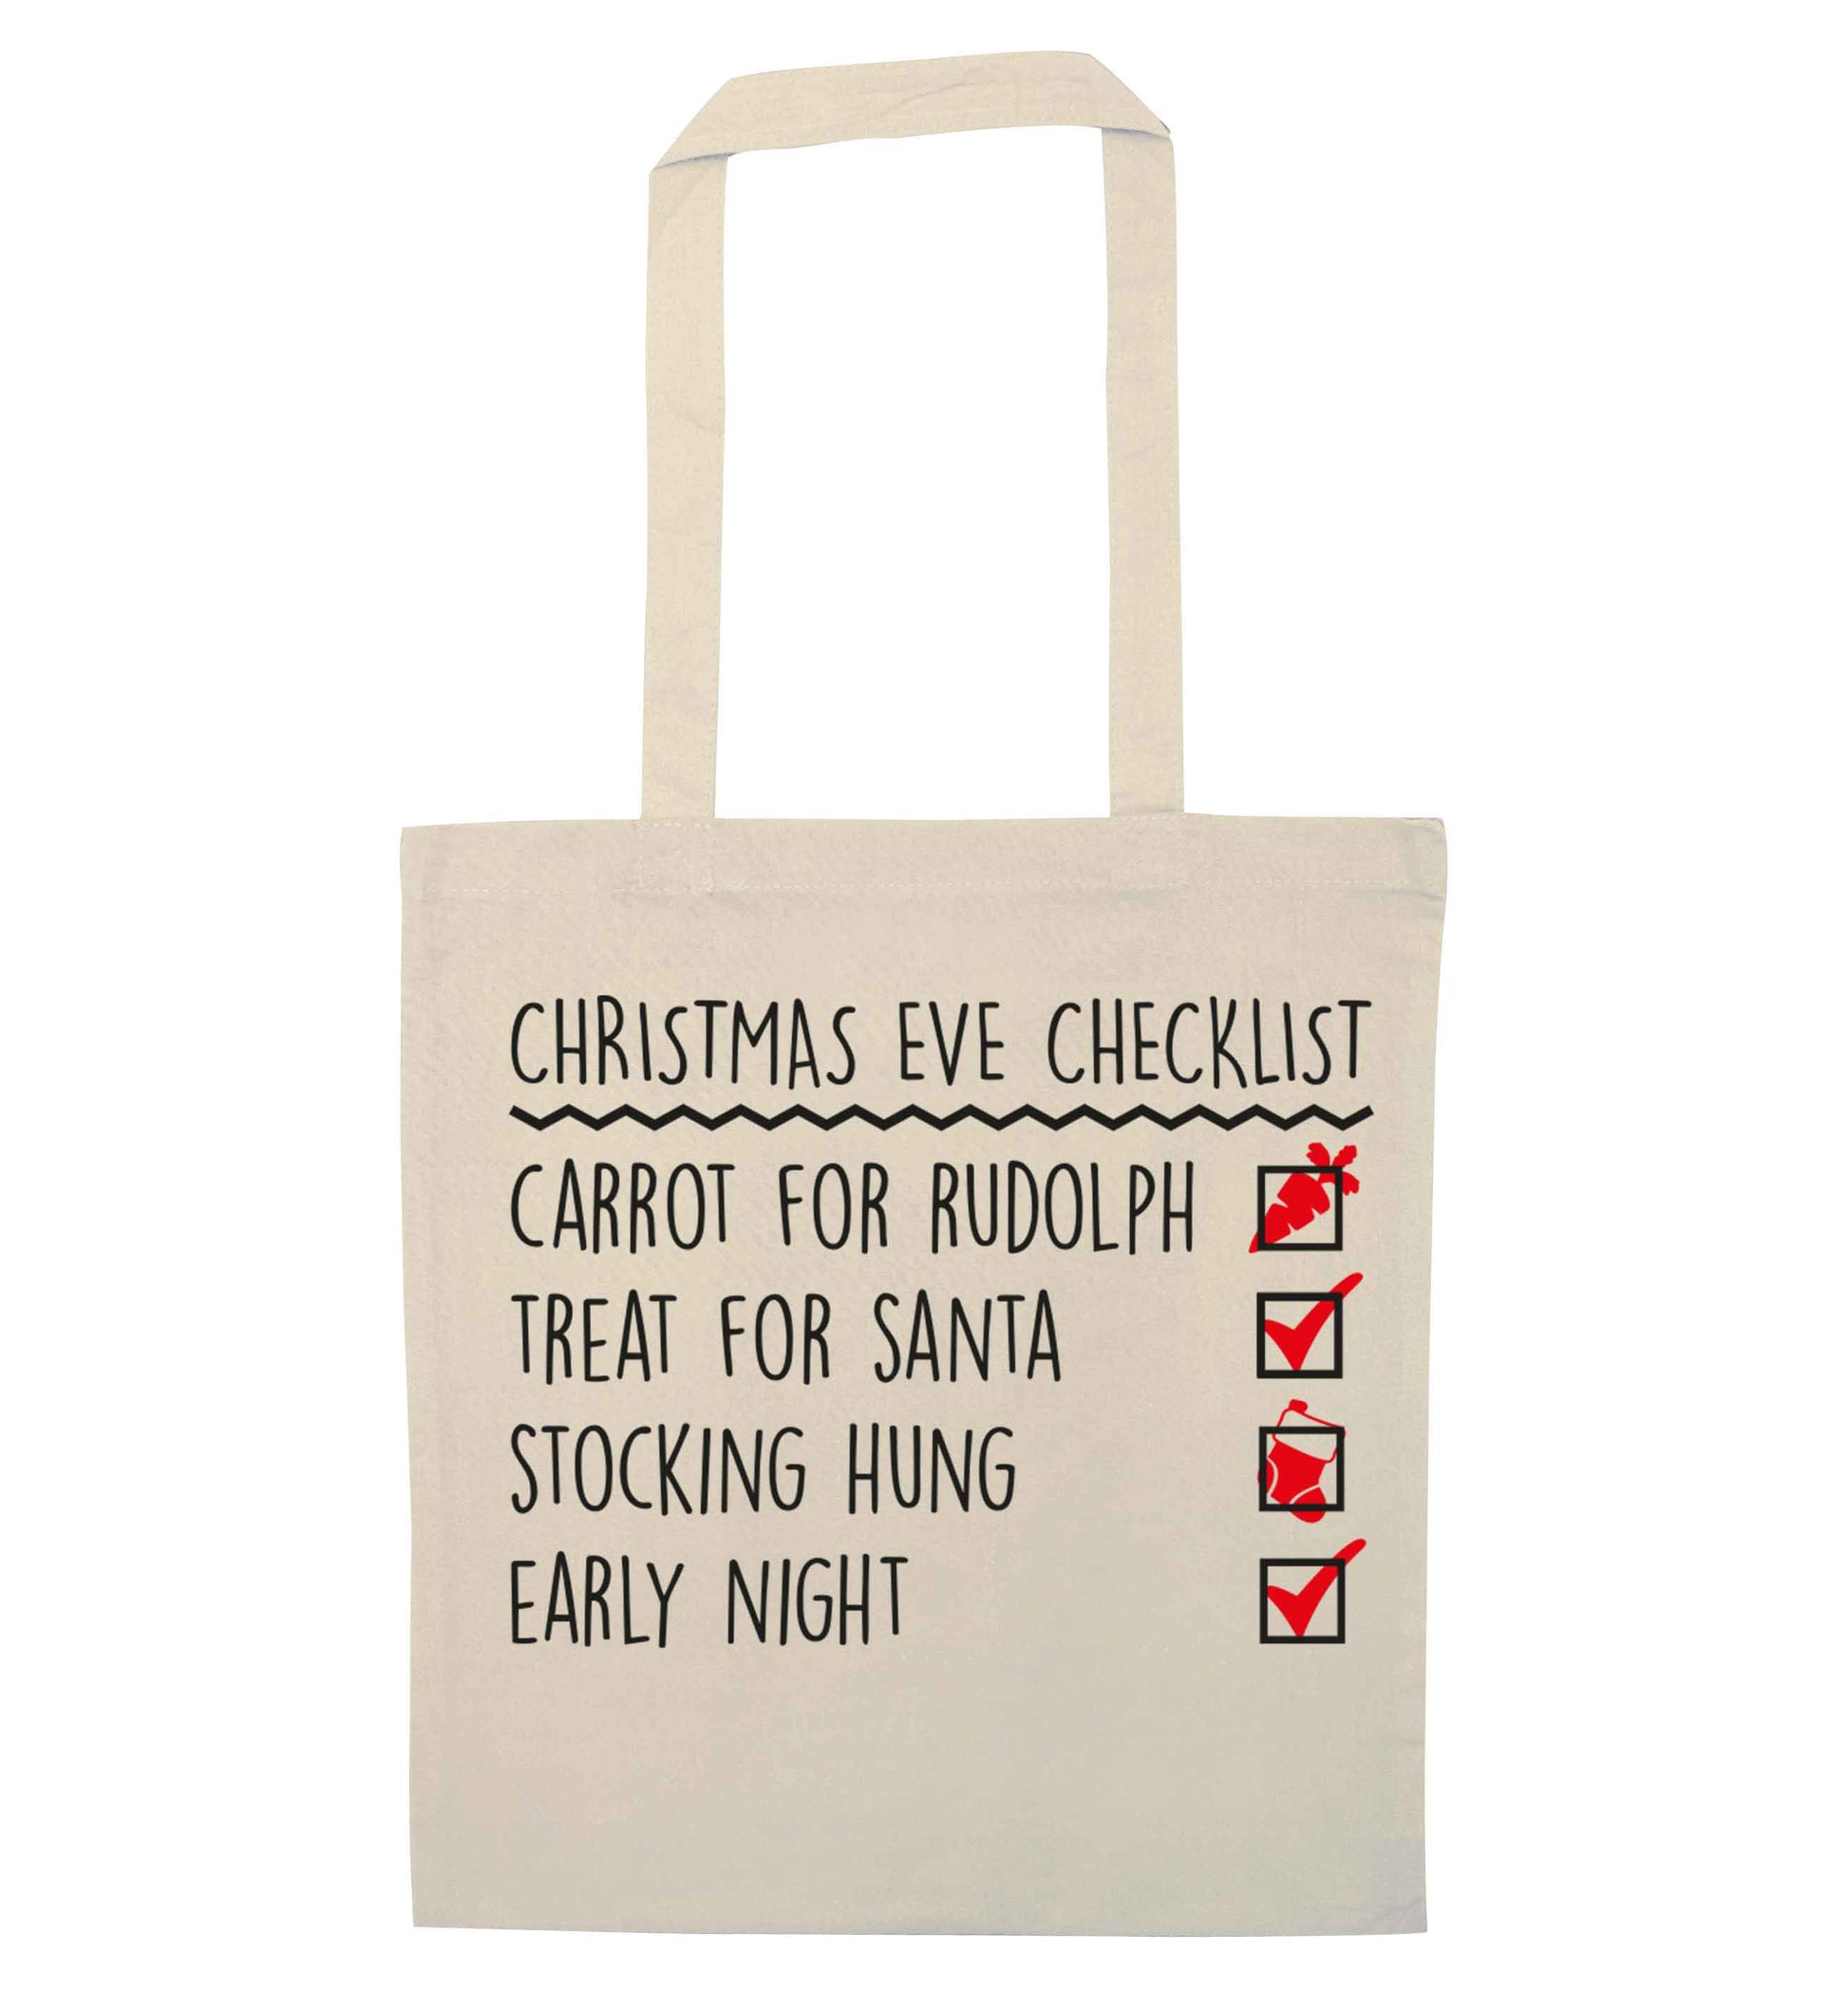 Candy Canes Candy Corns natural tote bag